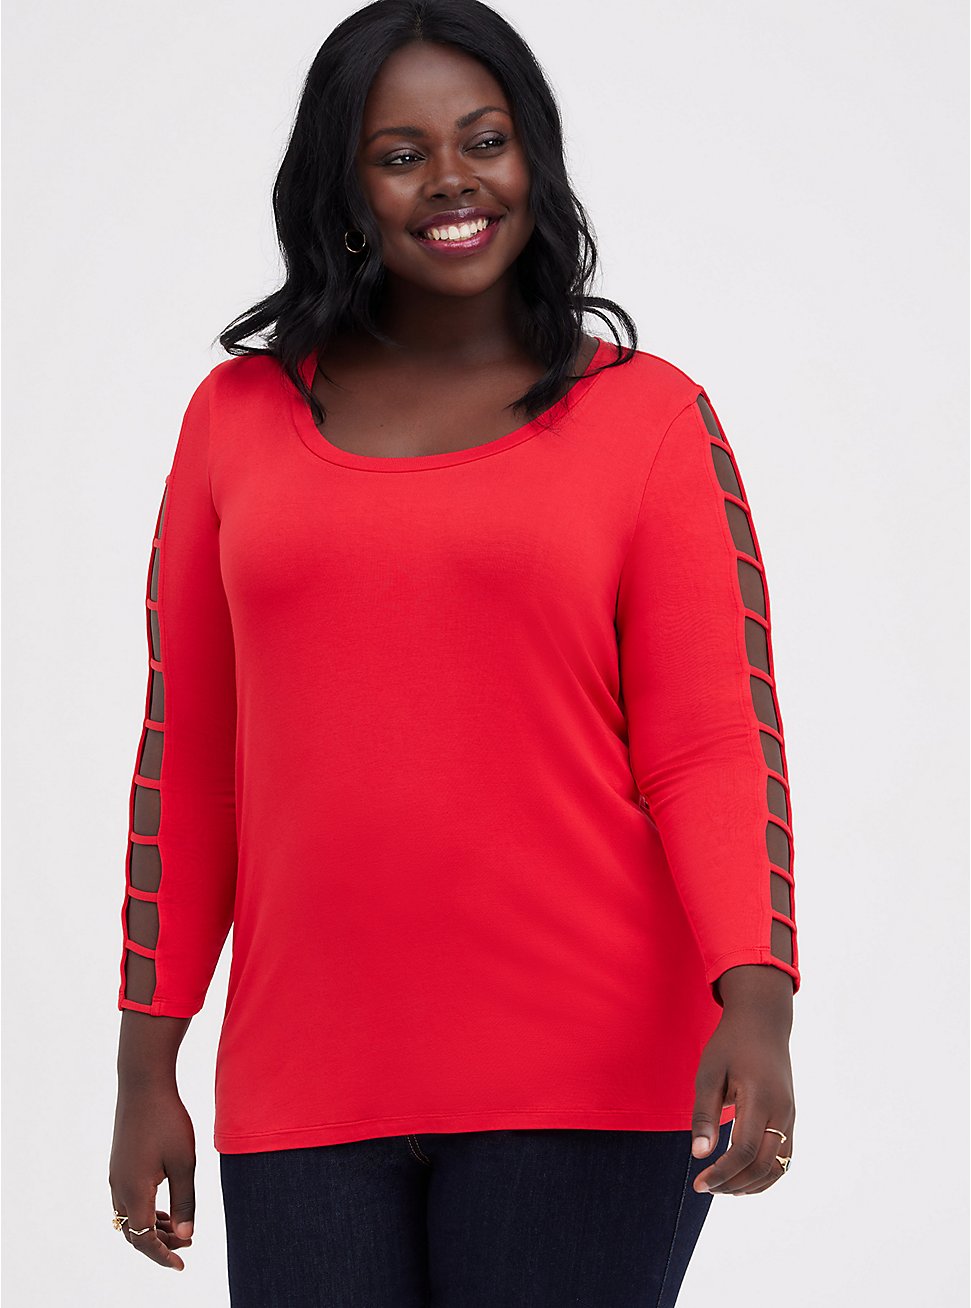 Plus Size Strappy Sleeve Top - Super Soft Red, RED, hi-res